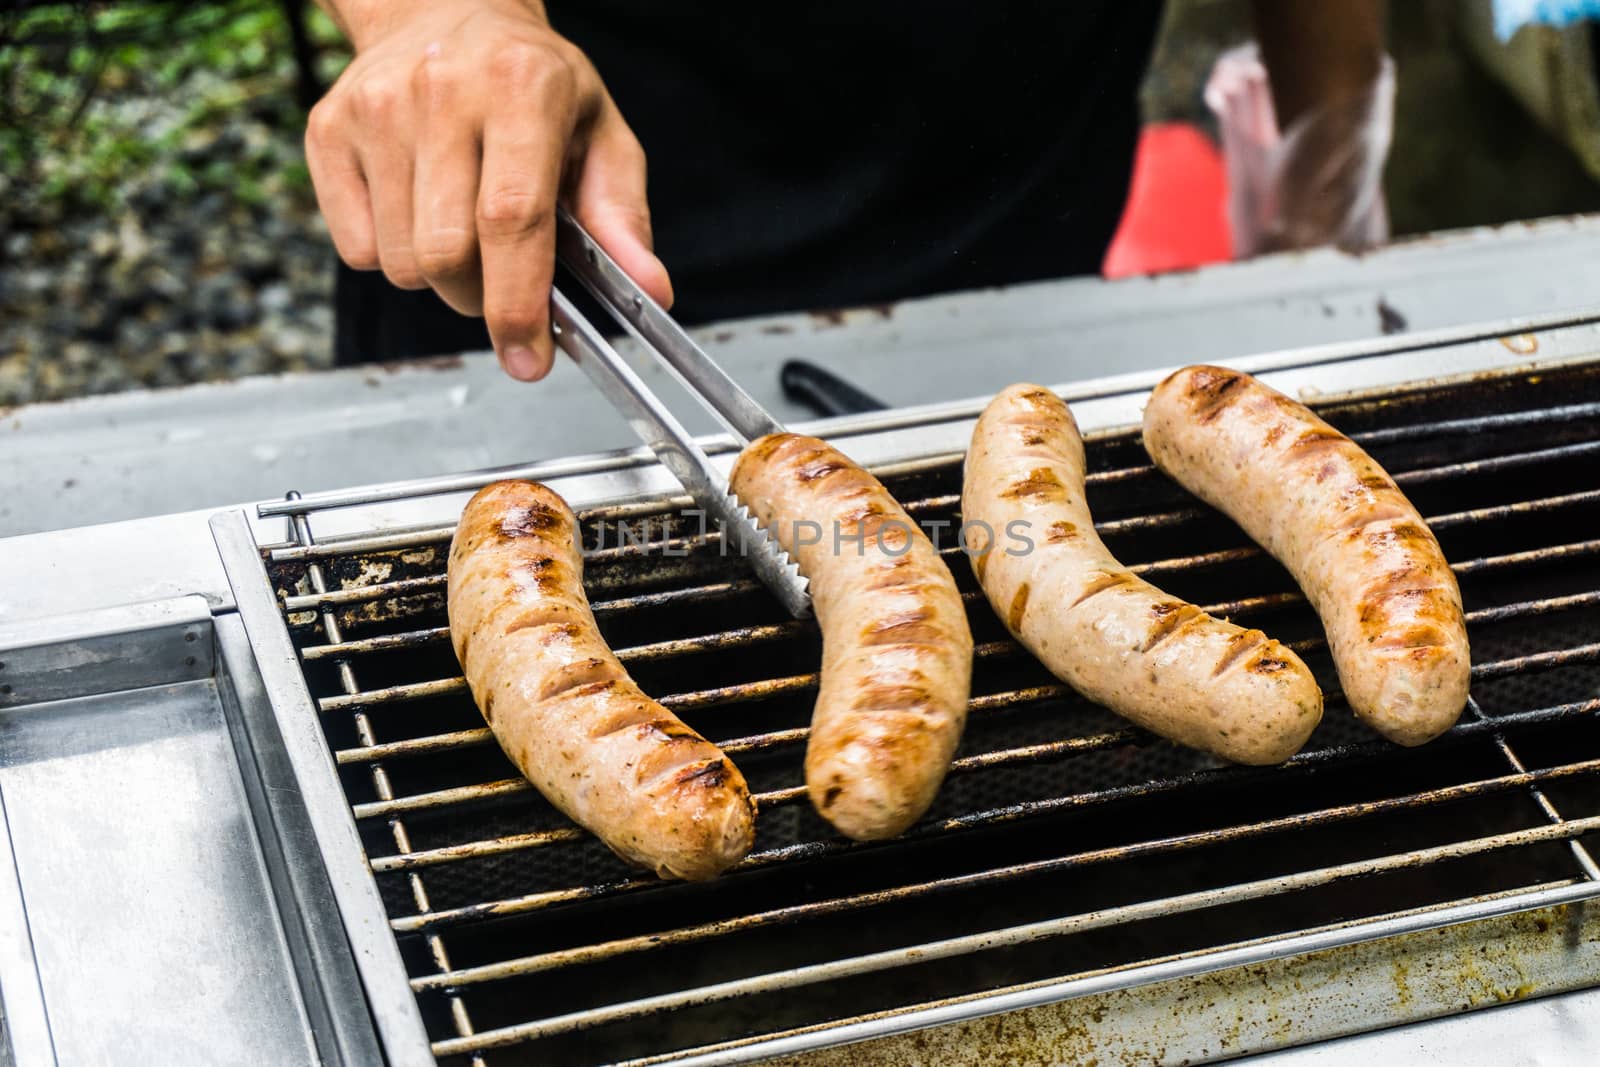 Fresh sausage and hot dogs grilling outdoors on a gas barbecue g by nopparats